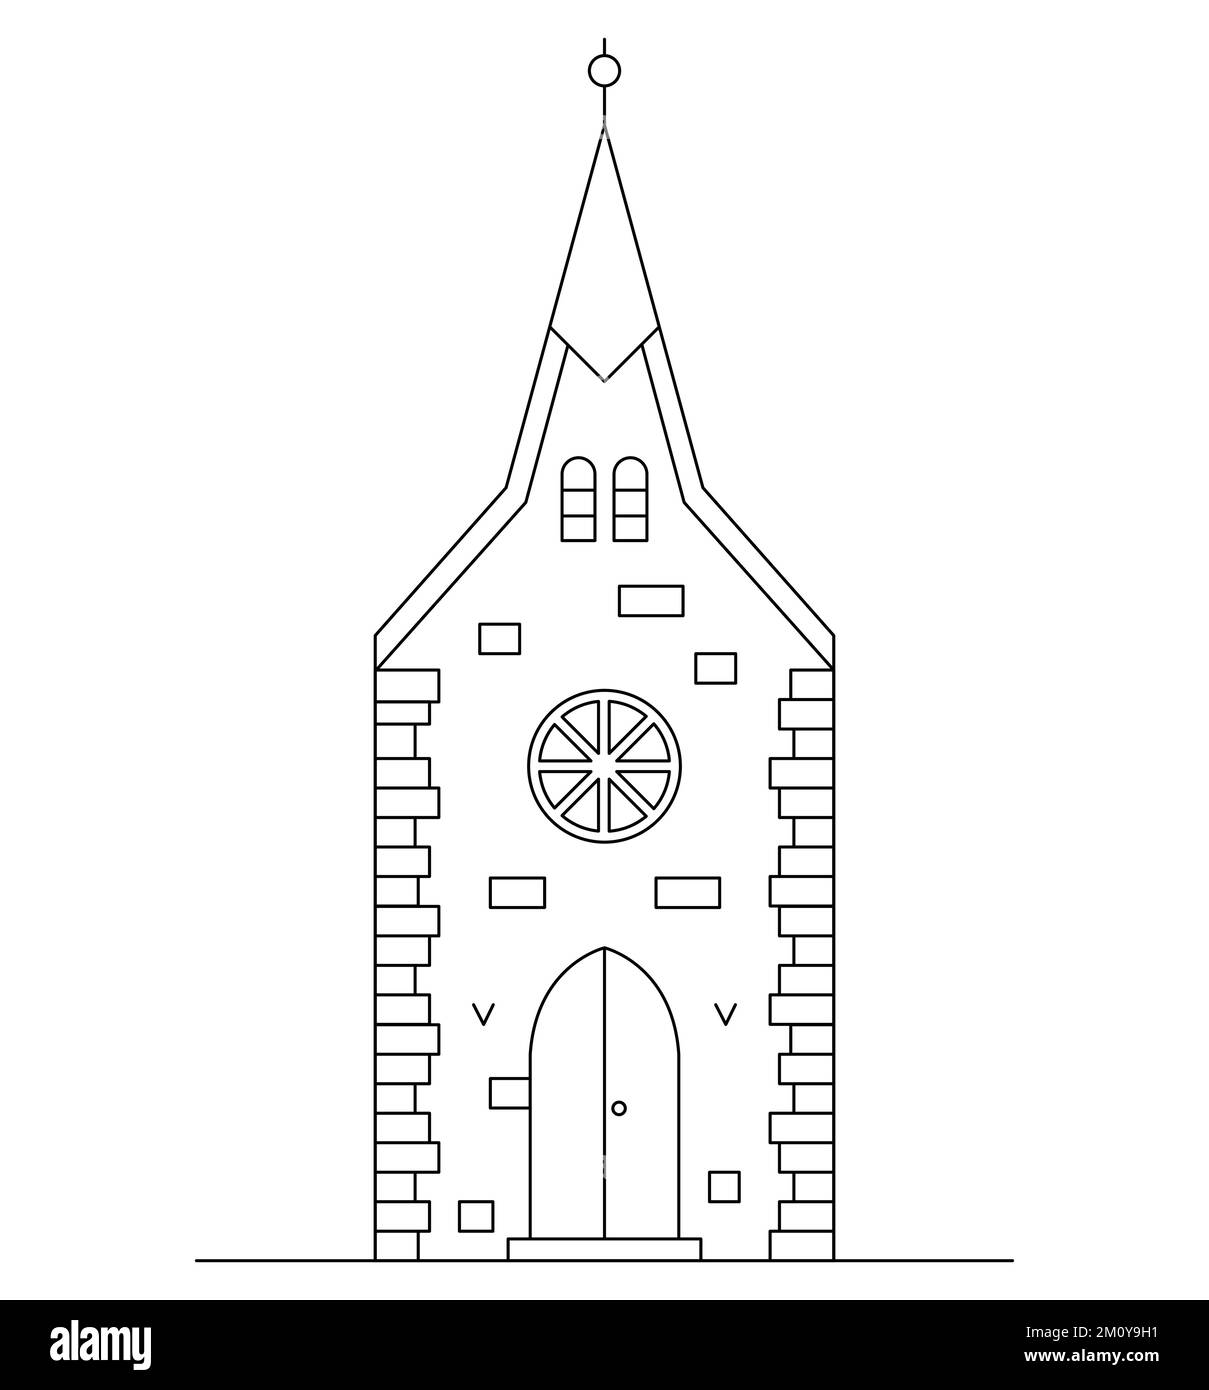 Vector line art illustration with one church. Stock Vector